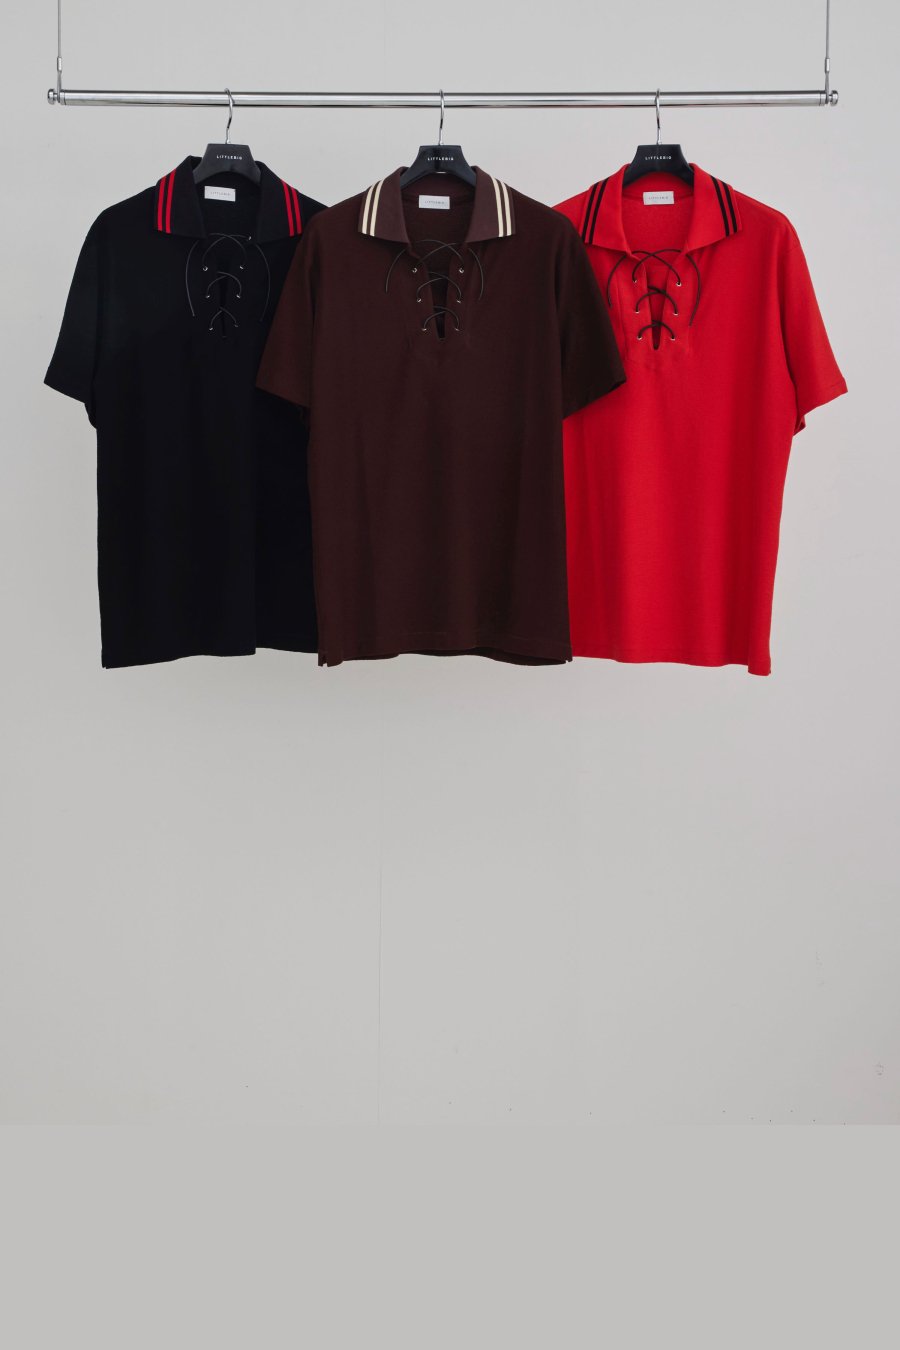 LITTLEBIG（リトルビッグ）のS/S Lace-Up Polo SH Black or Brown or Redの通販サイト-大阪 堀江  PALETTE art alive（パレットアートアライヴ）-